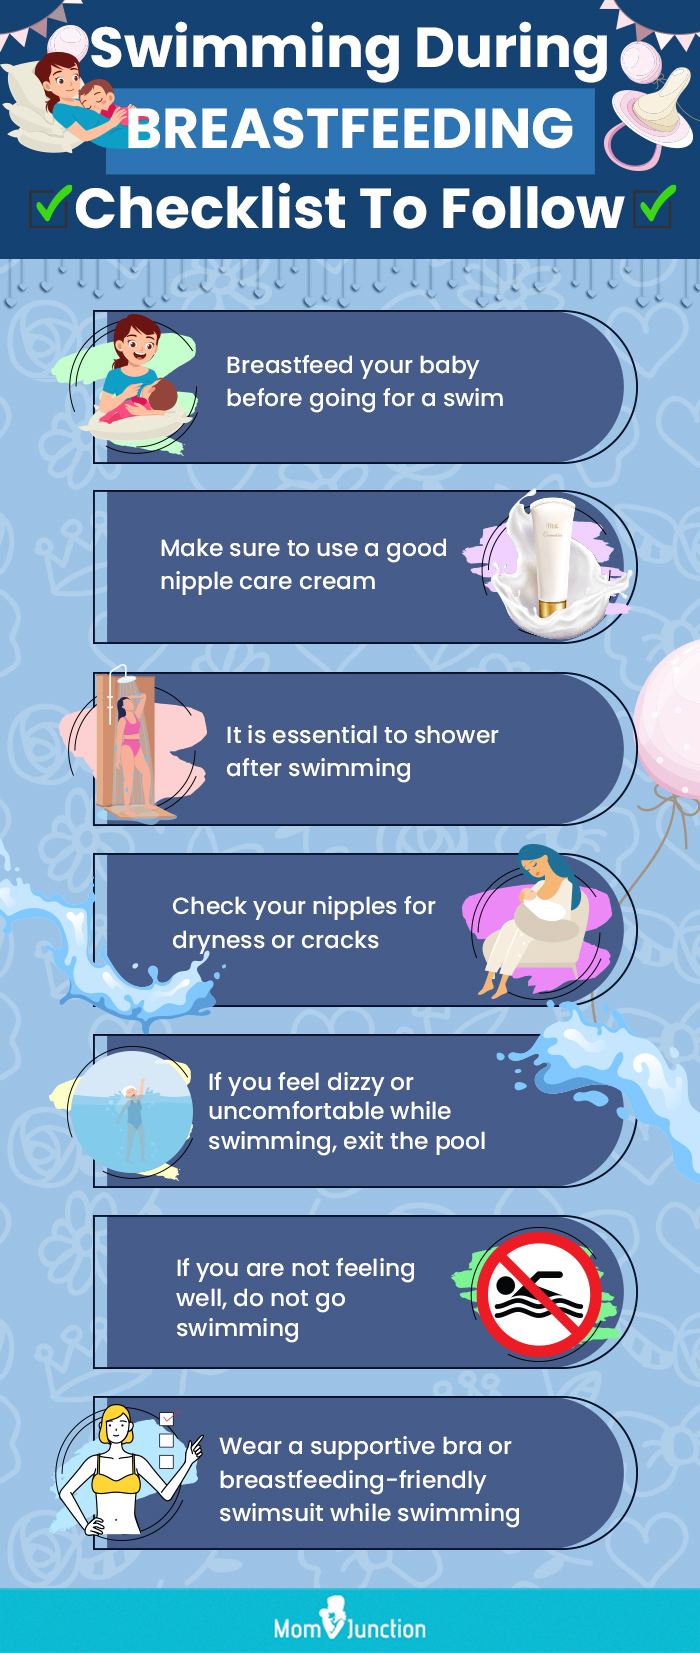 swimming during breastfeeding checklist to follow [infographic]